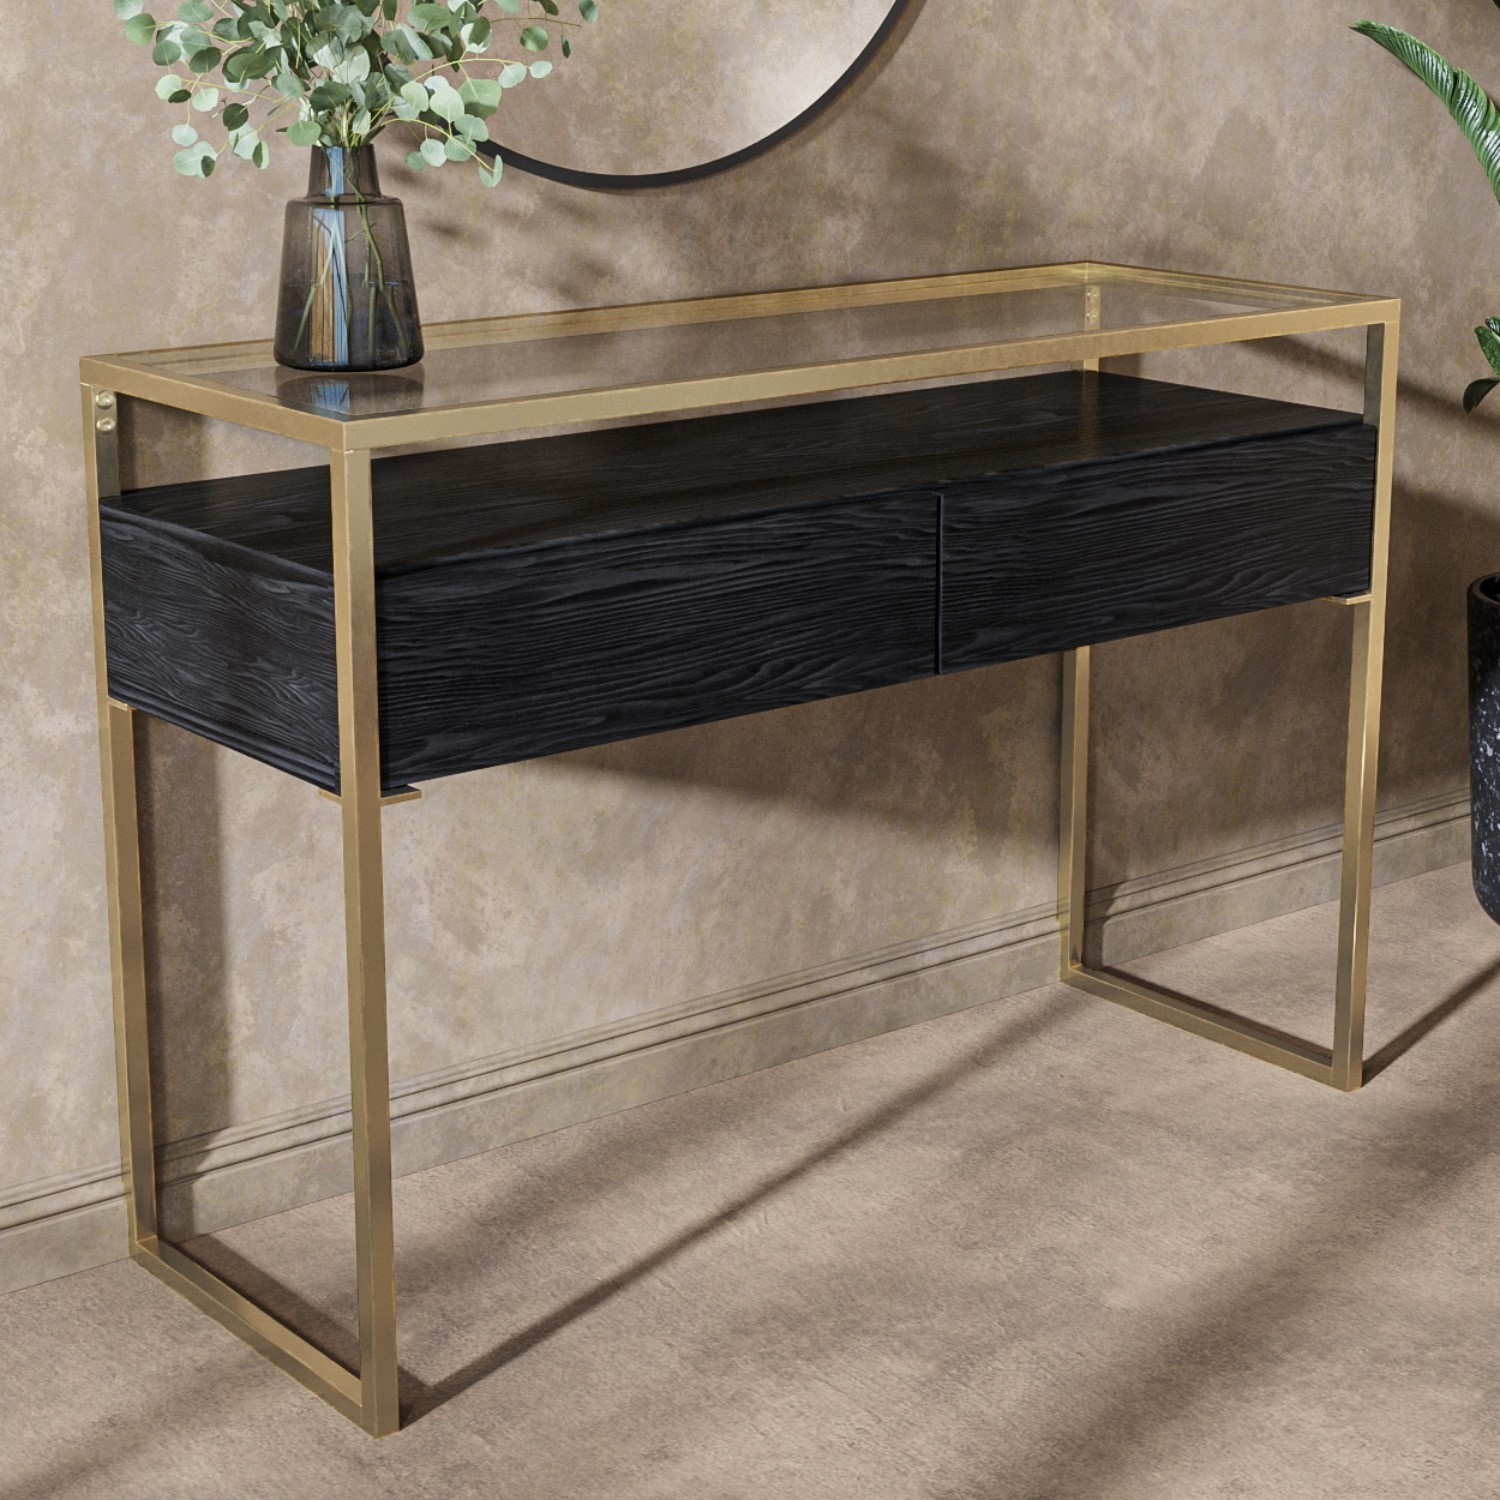 Photo of Large black glass top console table with drawers & gold legs- akila